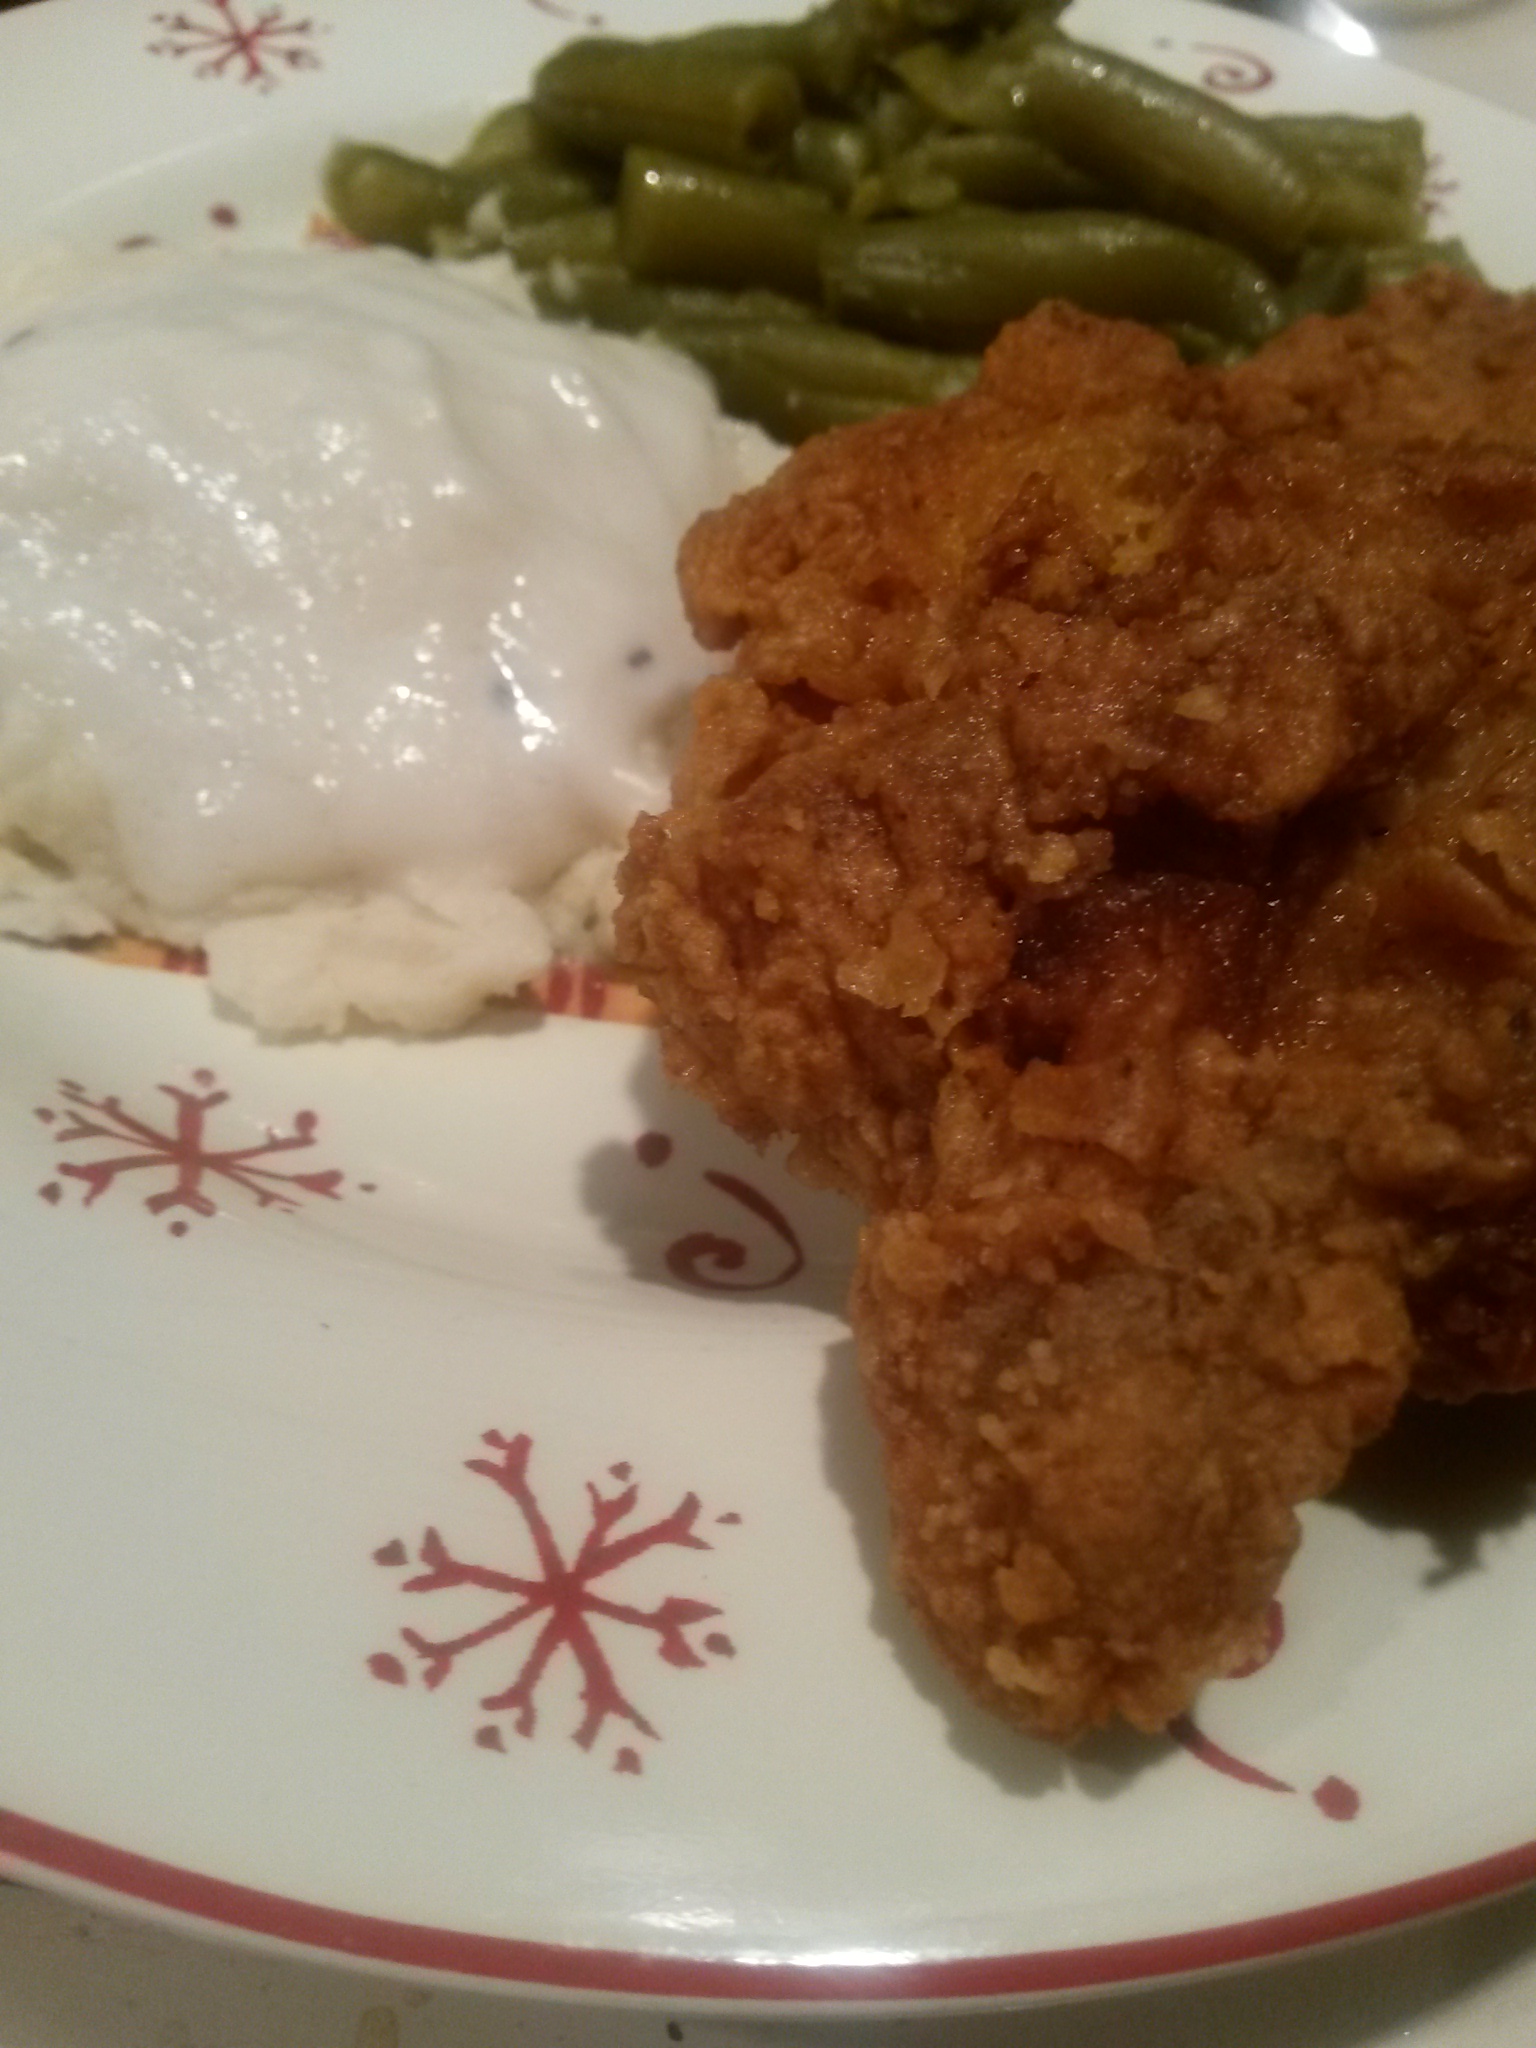 The temperatures here in Missouri reached the teen's this weekend. And for me that means making comfort foods ' Southern Fried Chicken, Mash potatoes/Gravy and Green Beans on a holiday plate to boot. 